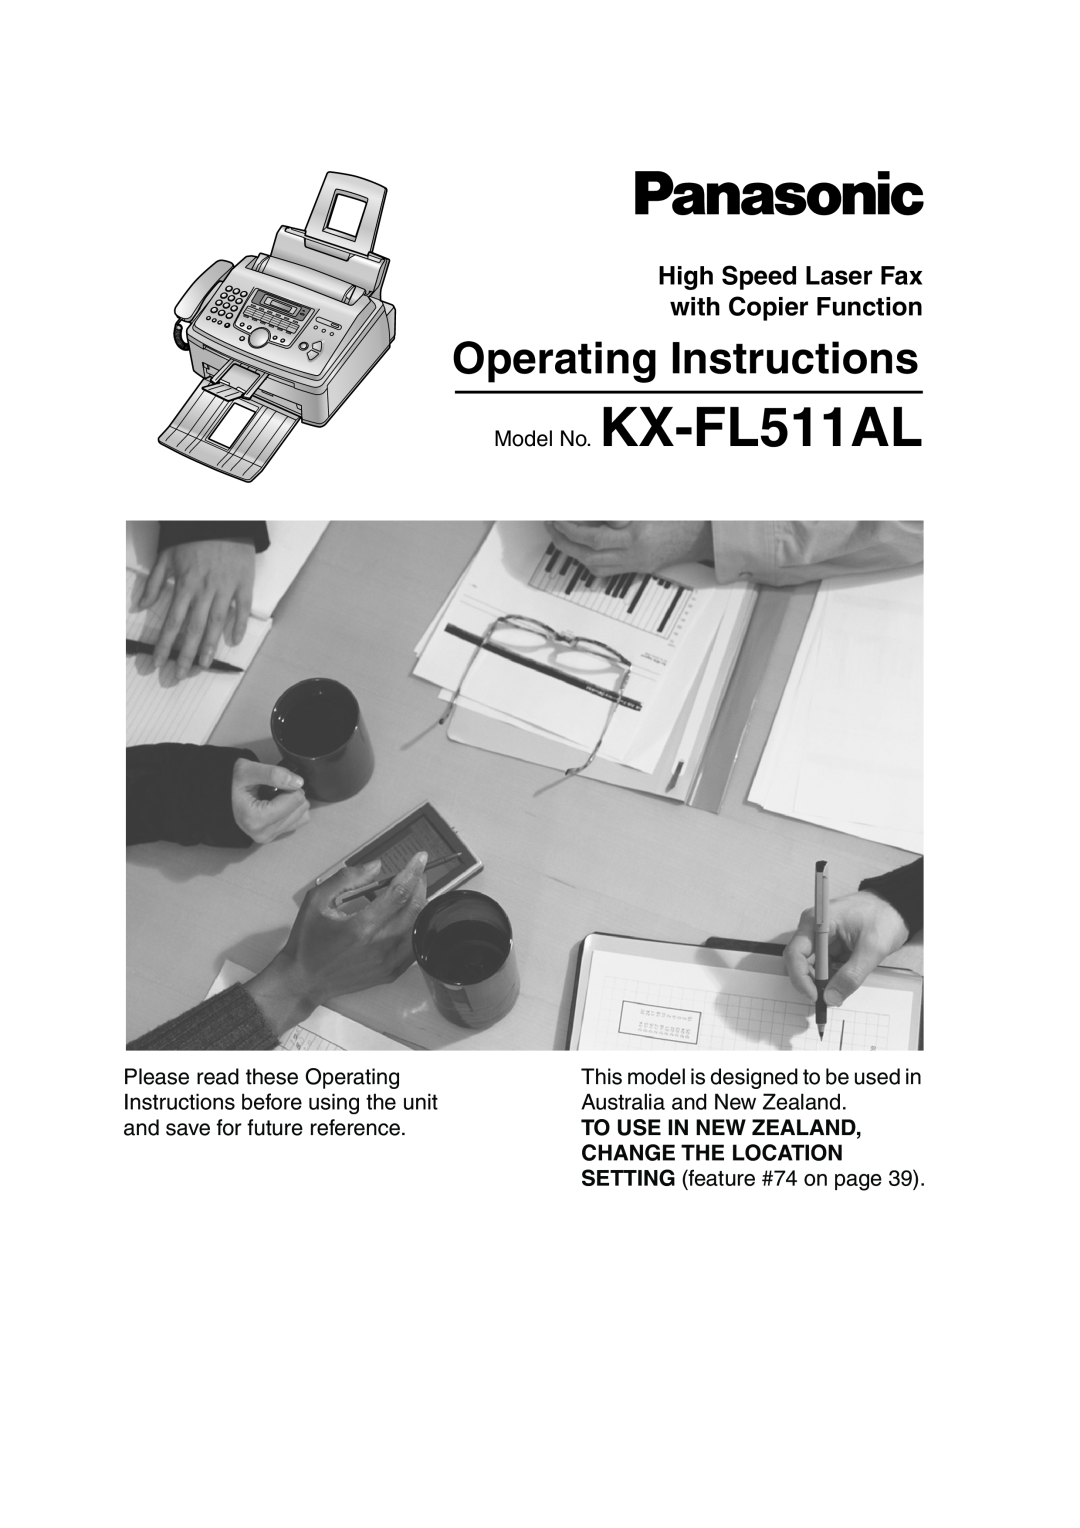 Panasonic manual Operating Instructions, High Speed Laser Fax with Copier Function, Model No. KX-FL511AL 